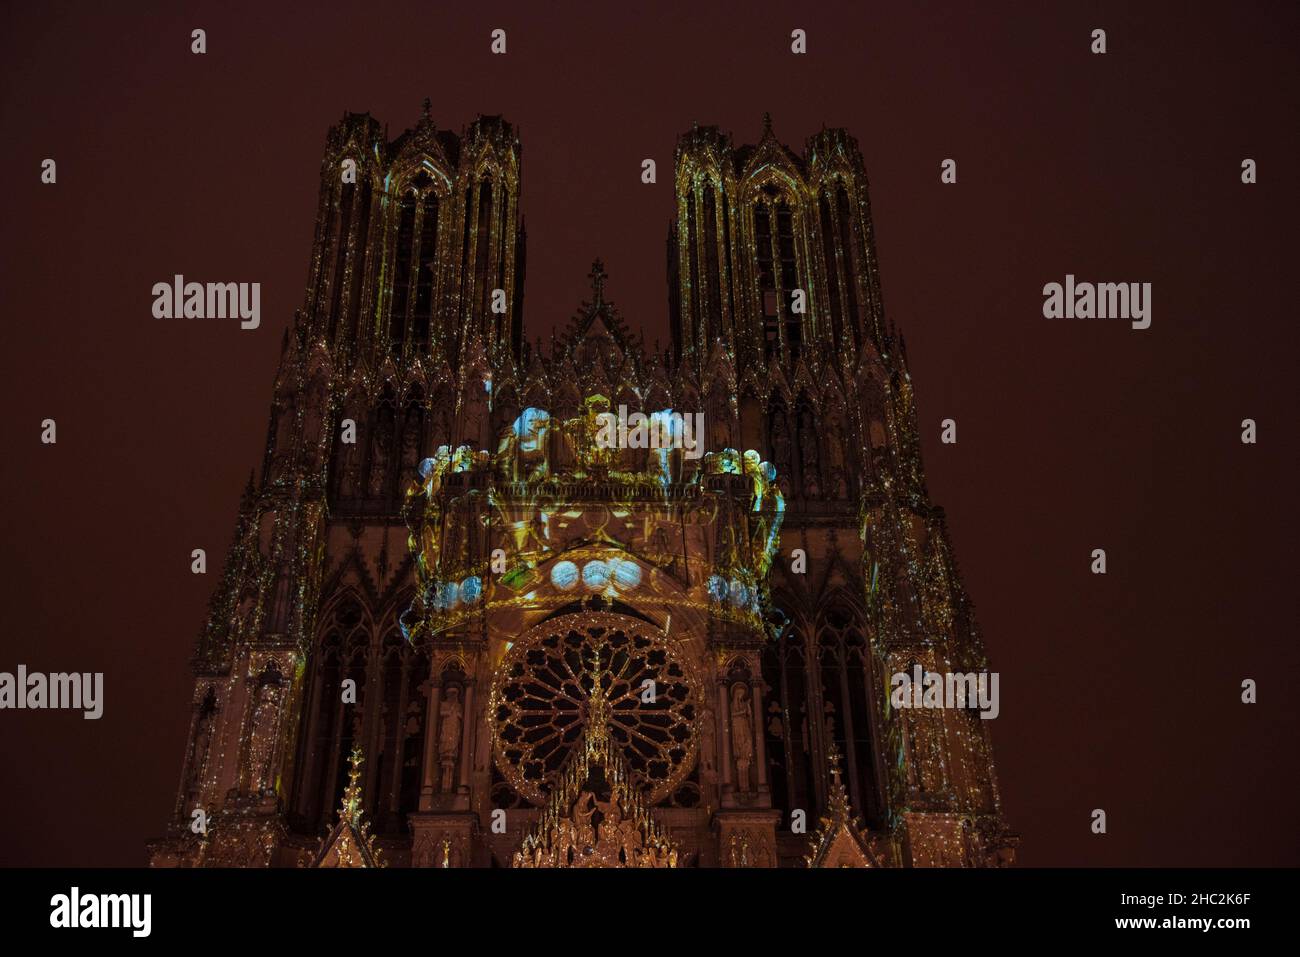 Reims, France - December 19, 2021: Colorful Christmas lights show on Reims Cathedral facade. Royal crown Stock Photo